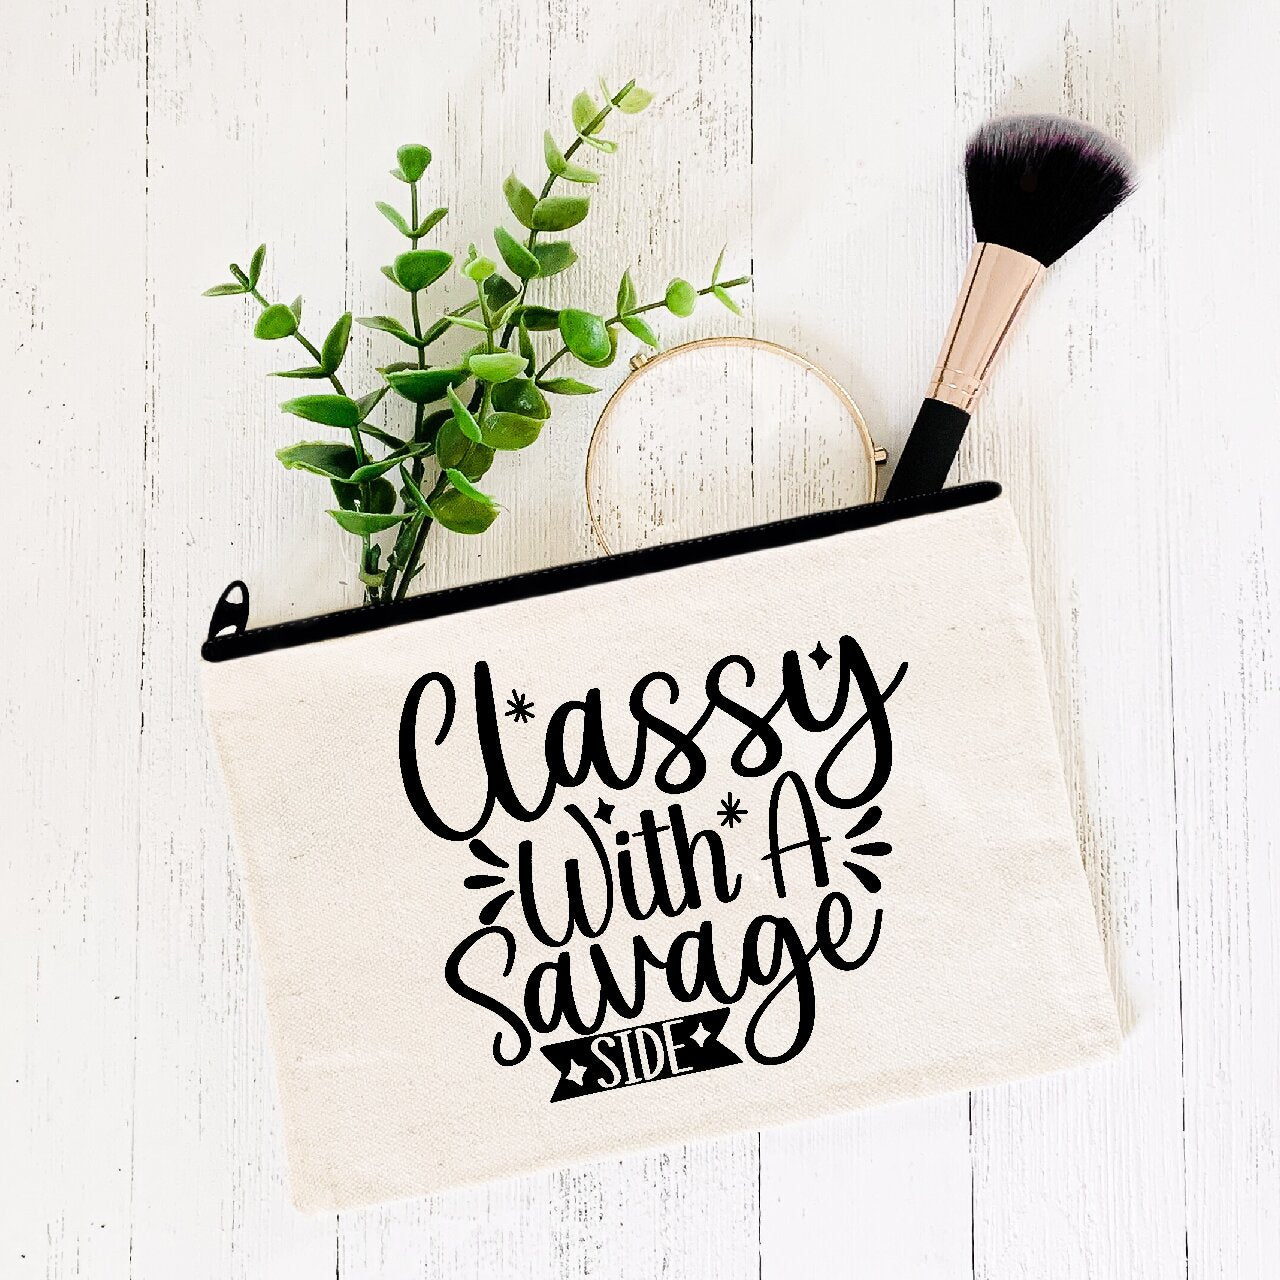 Classy With A Savage Side - Make-Up Bag/Pencil Case